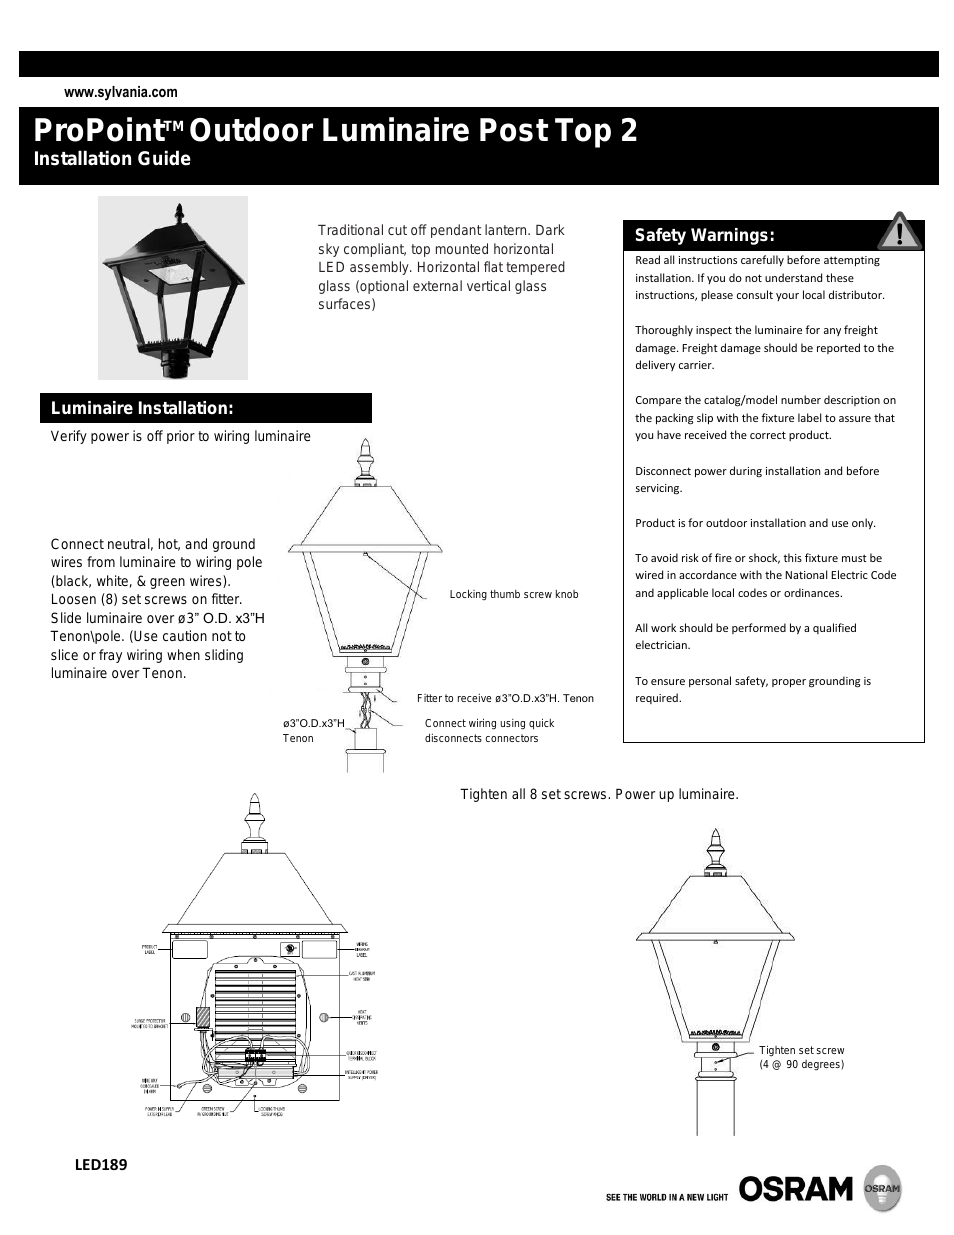 ProPoint Outdoor Luminaire Post Top 2